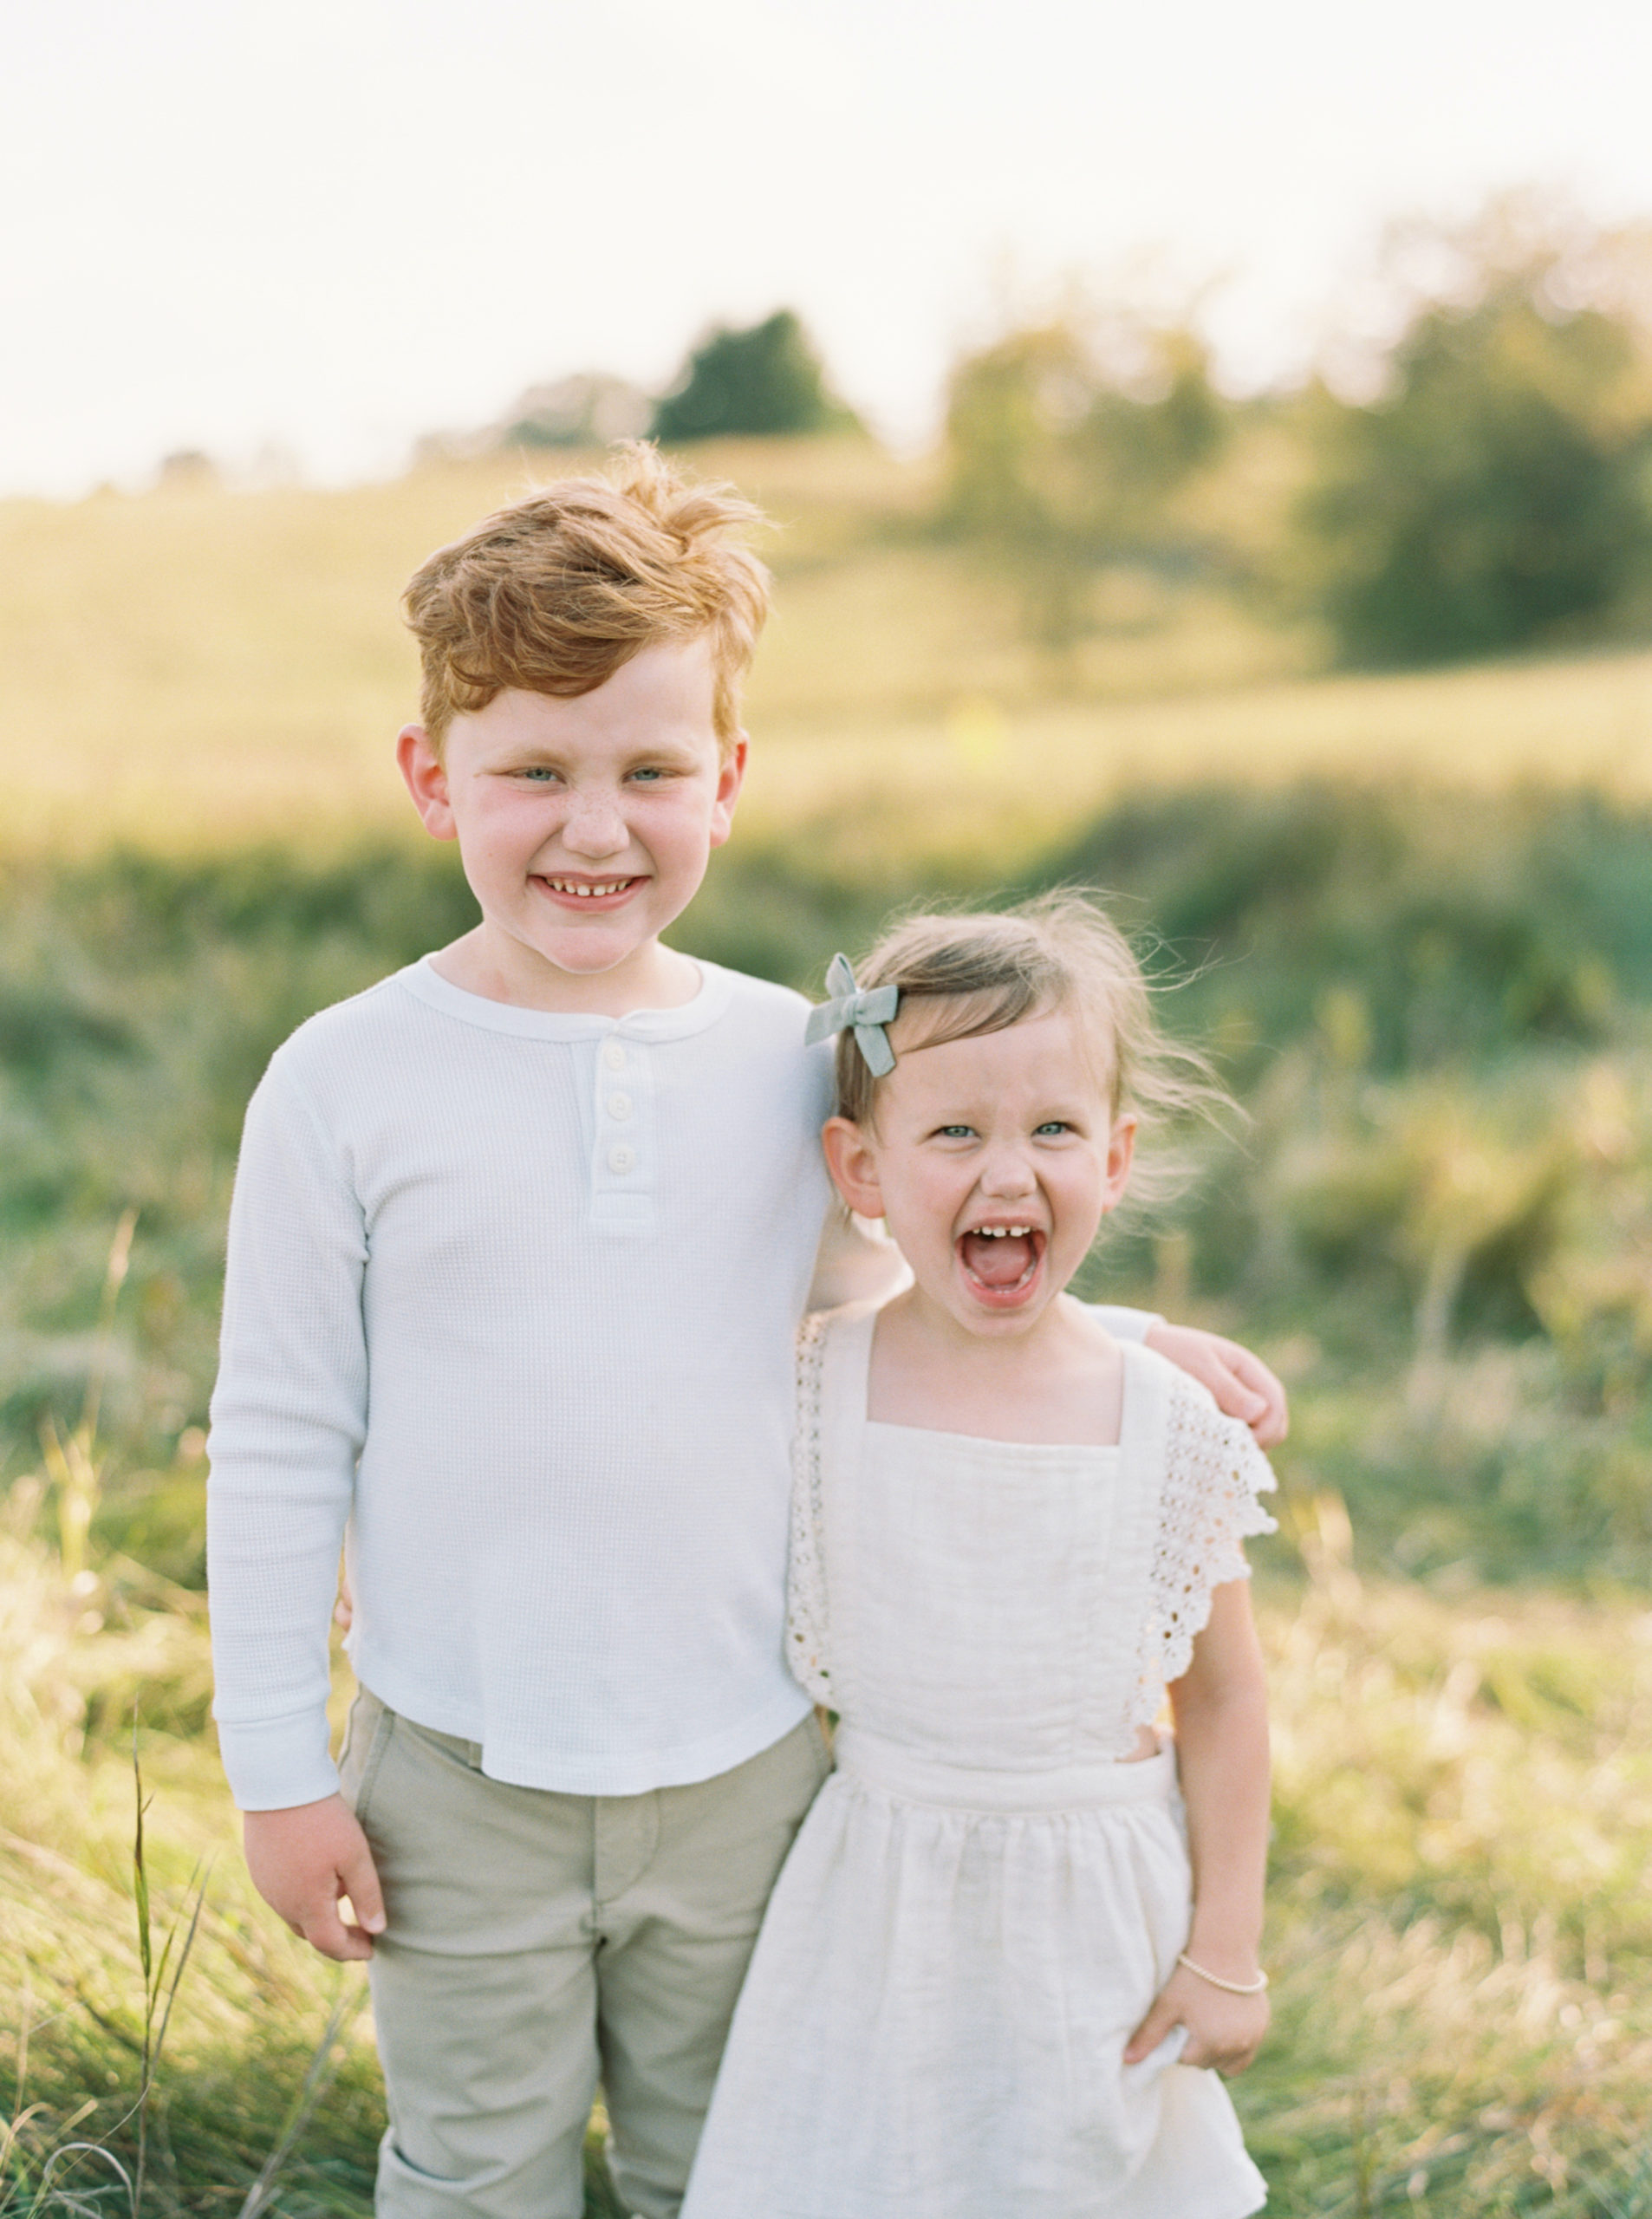 Brother and Sister in a grassy green field setting in Shorewood in the summer